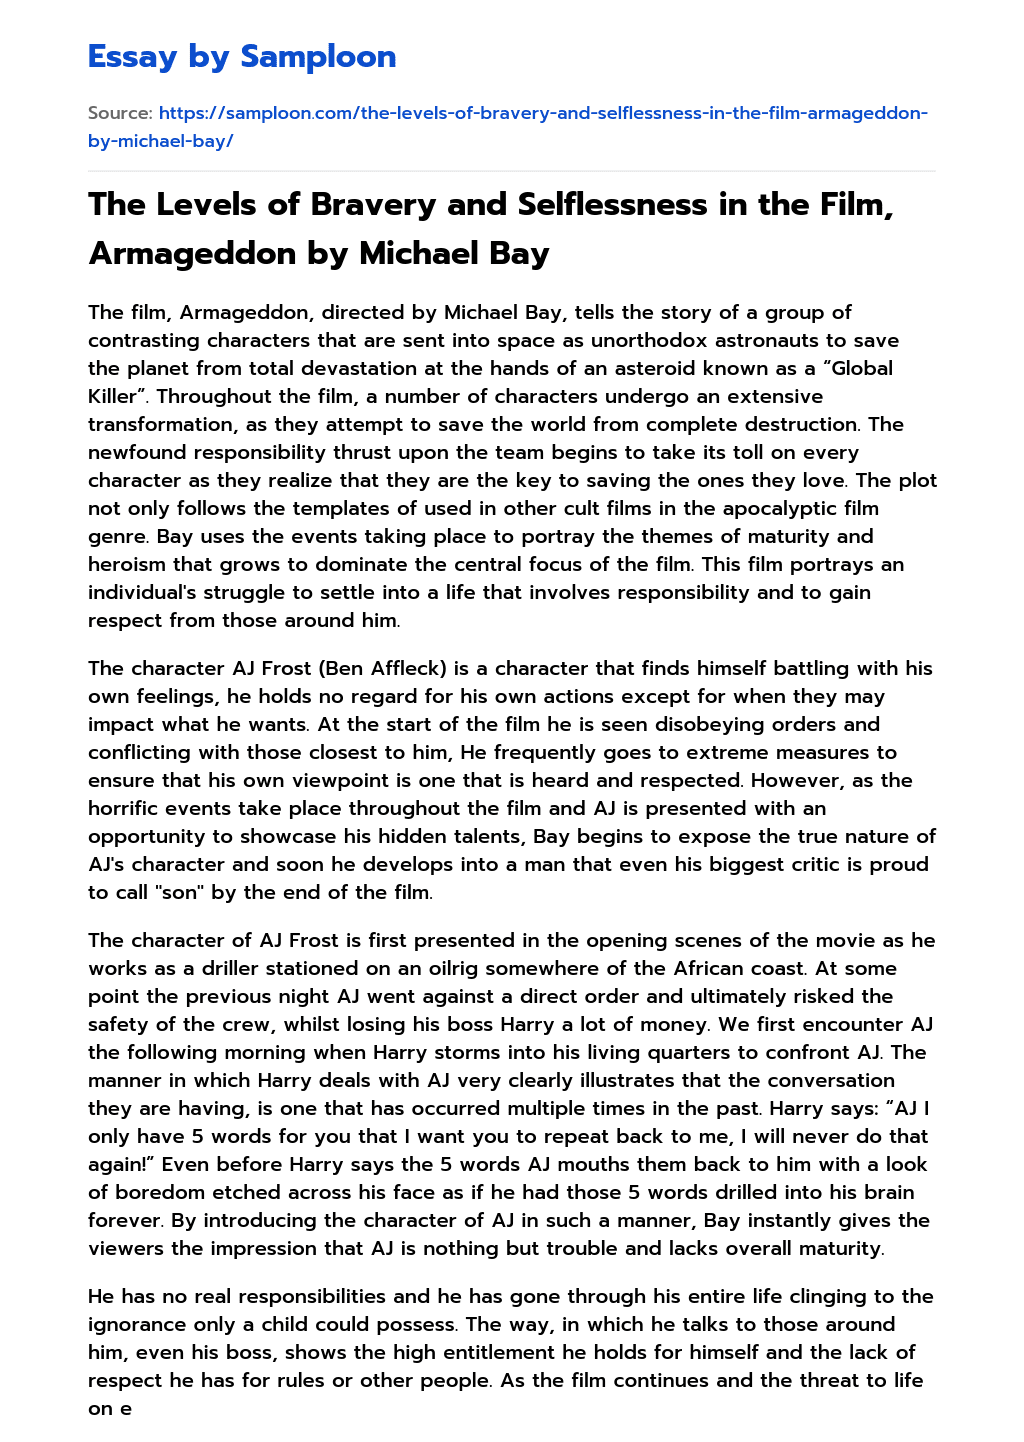 The Levels of Bravery and Selflessness in the Film, Armageddon by Michael Bay essay